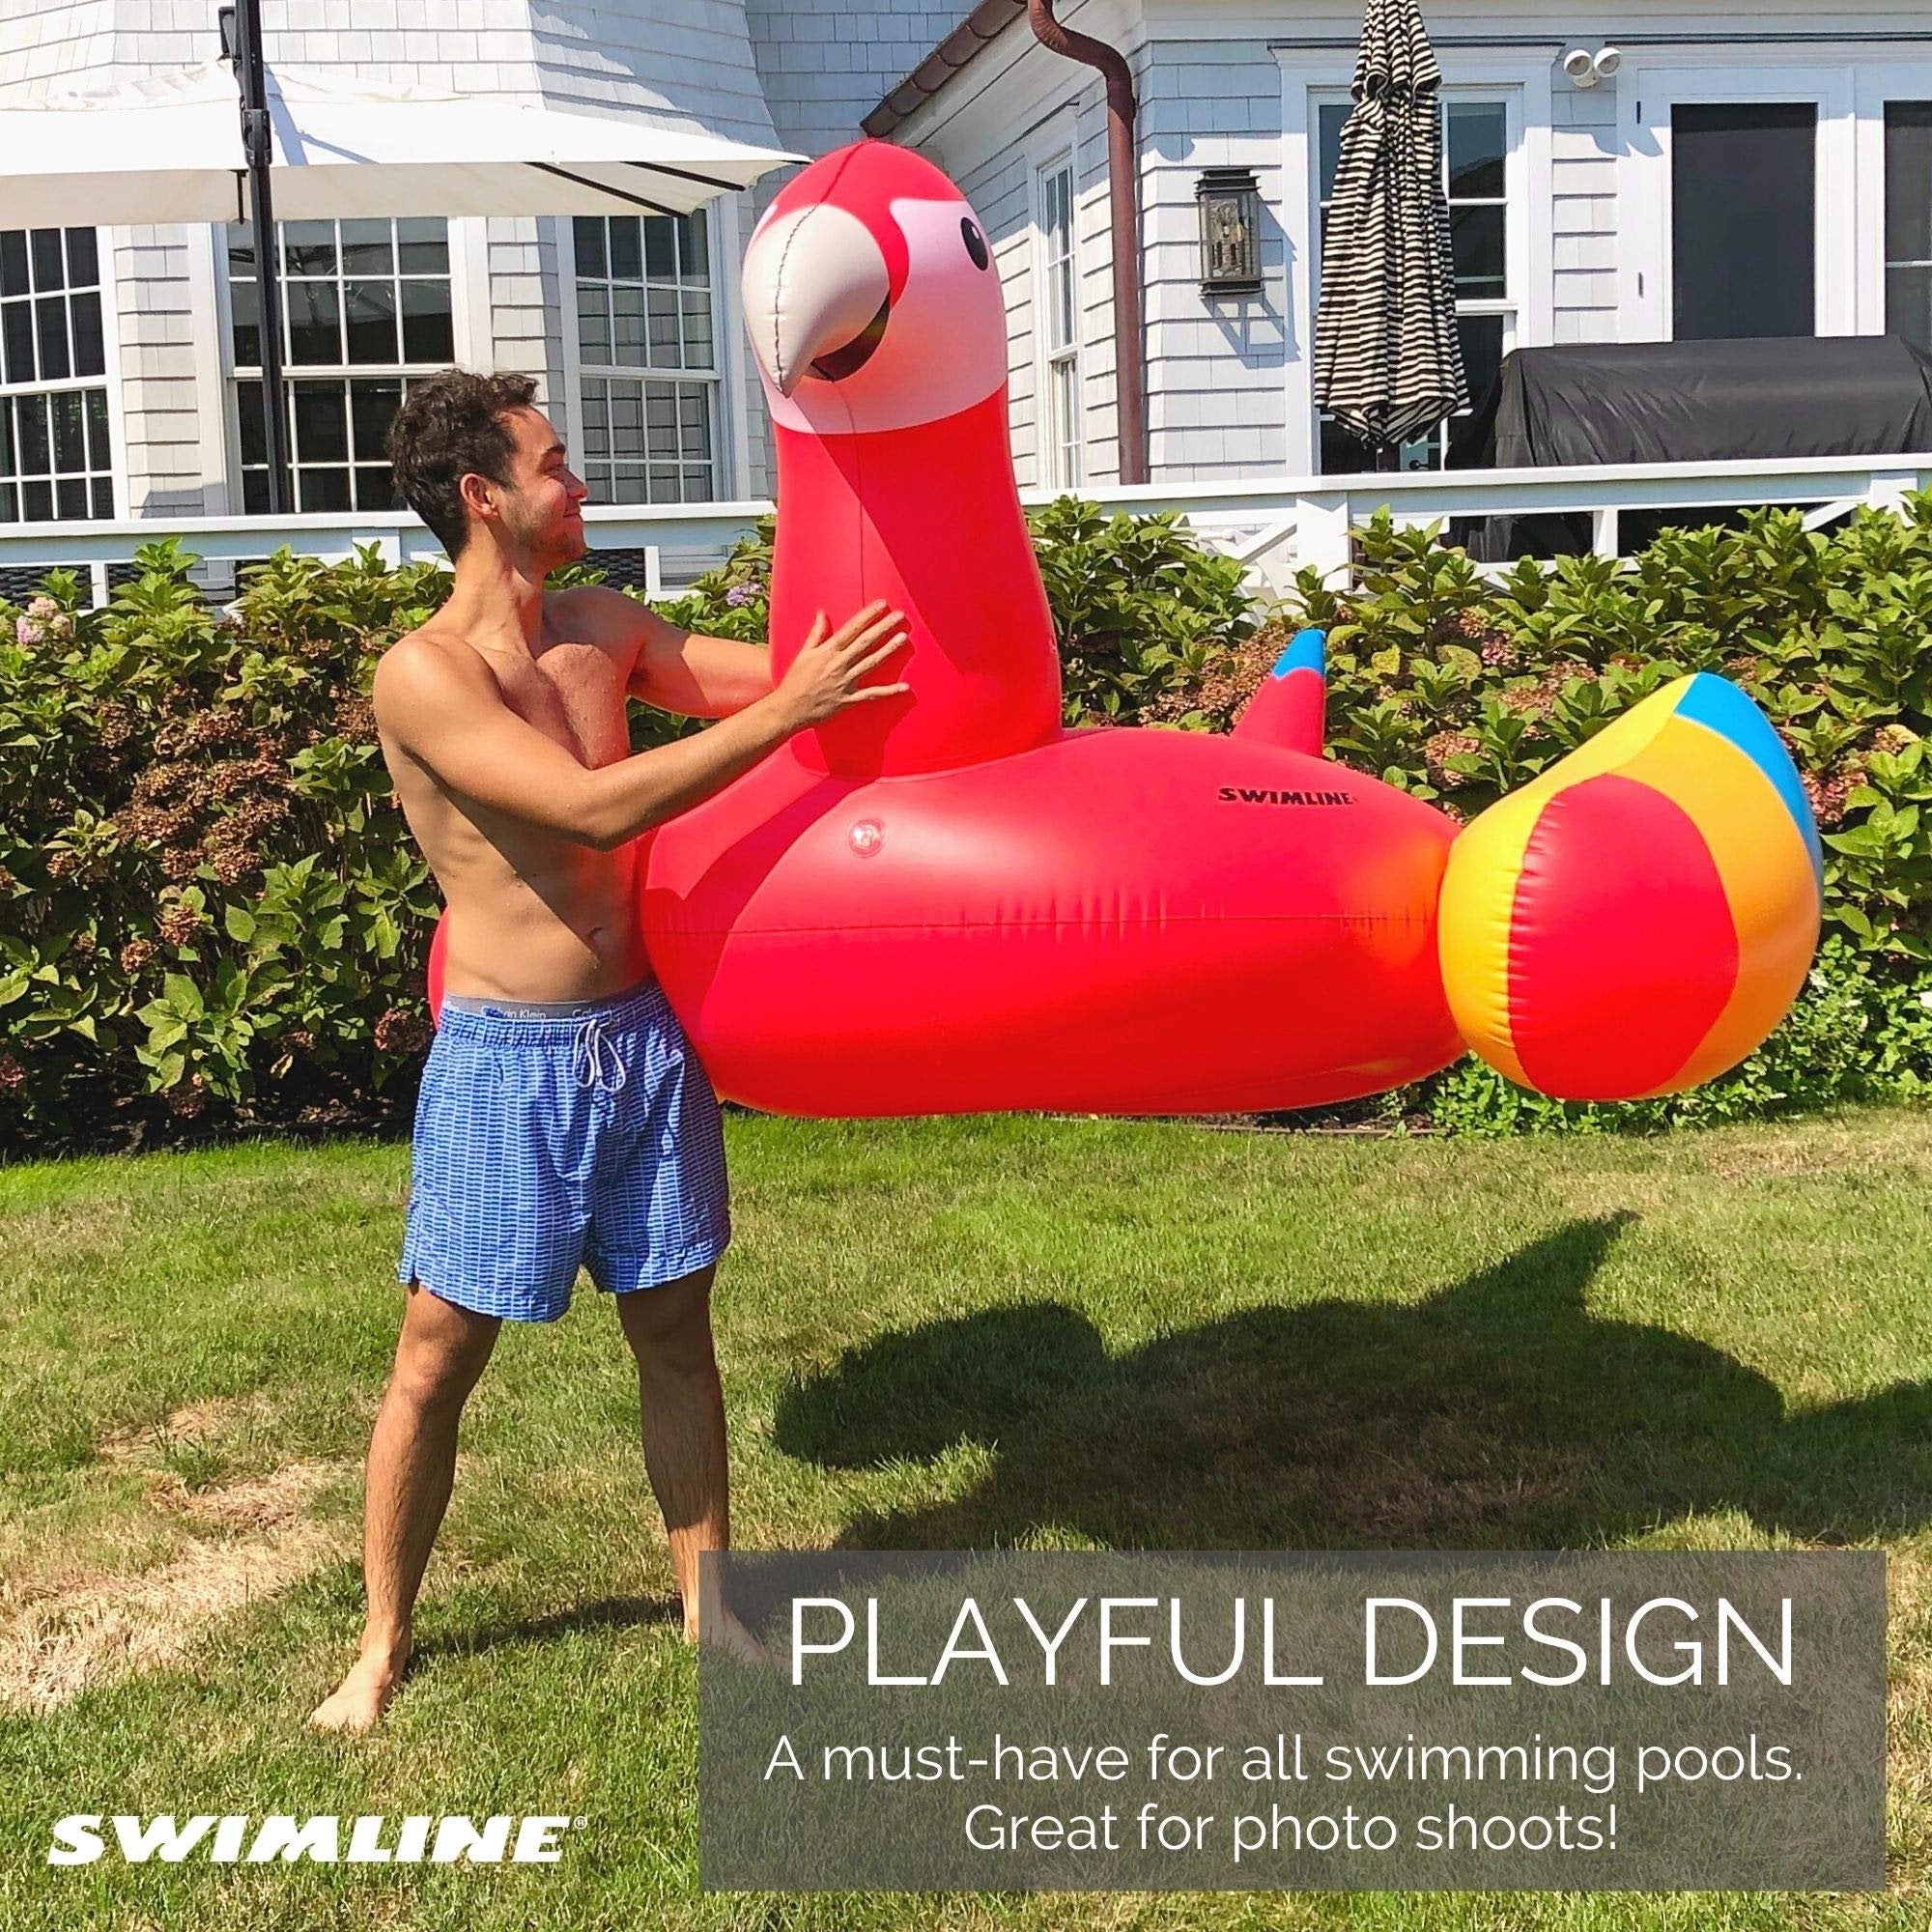 SWIMLINE ORIGINAL 90629 Giant Inflatable Parrot Pool Float Floatie Ride-On Lounge W/ Stable Legs Wings Large Rideable Blow Up Summer Beach Swimming Party Lounge Big Raft Tube Decoration Toys Kids